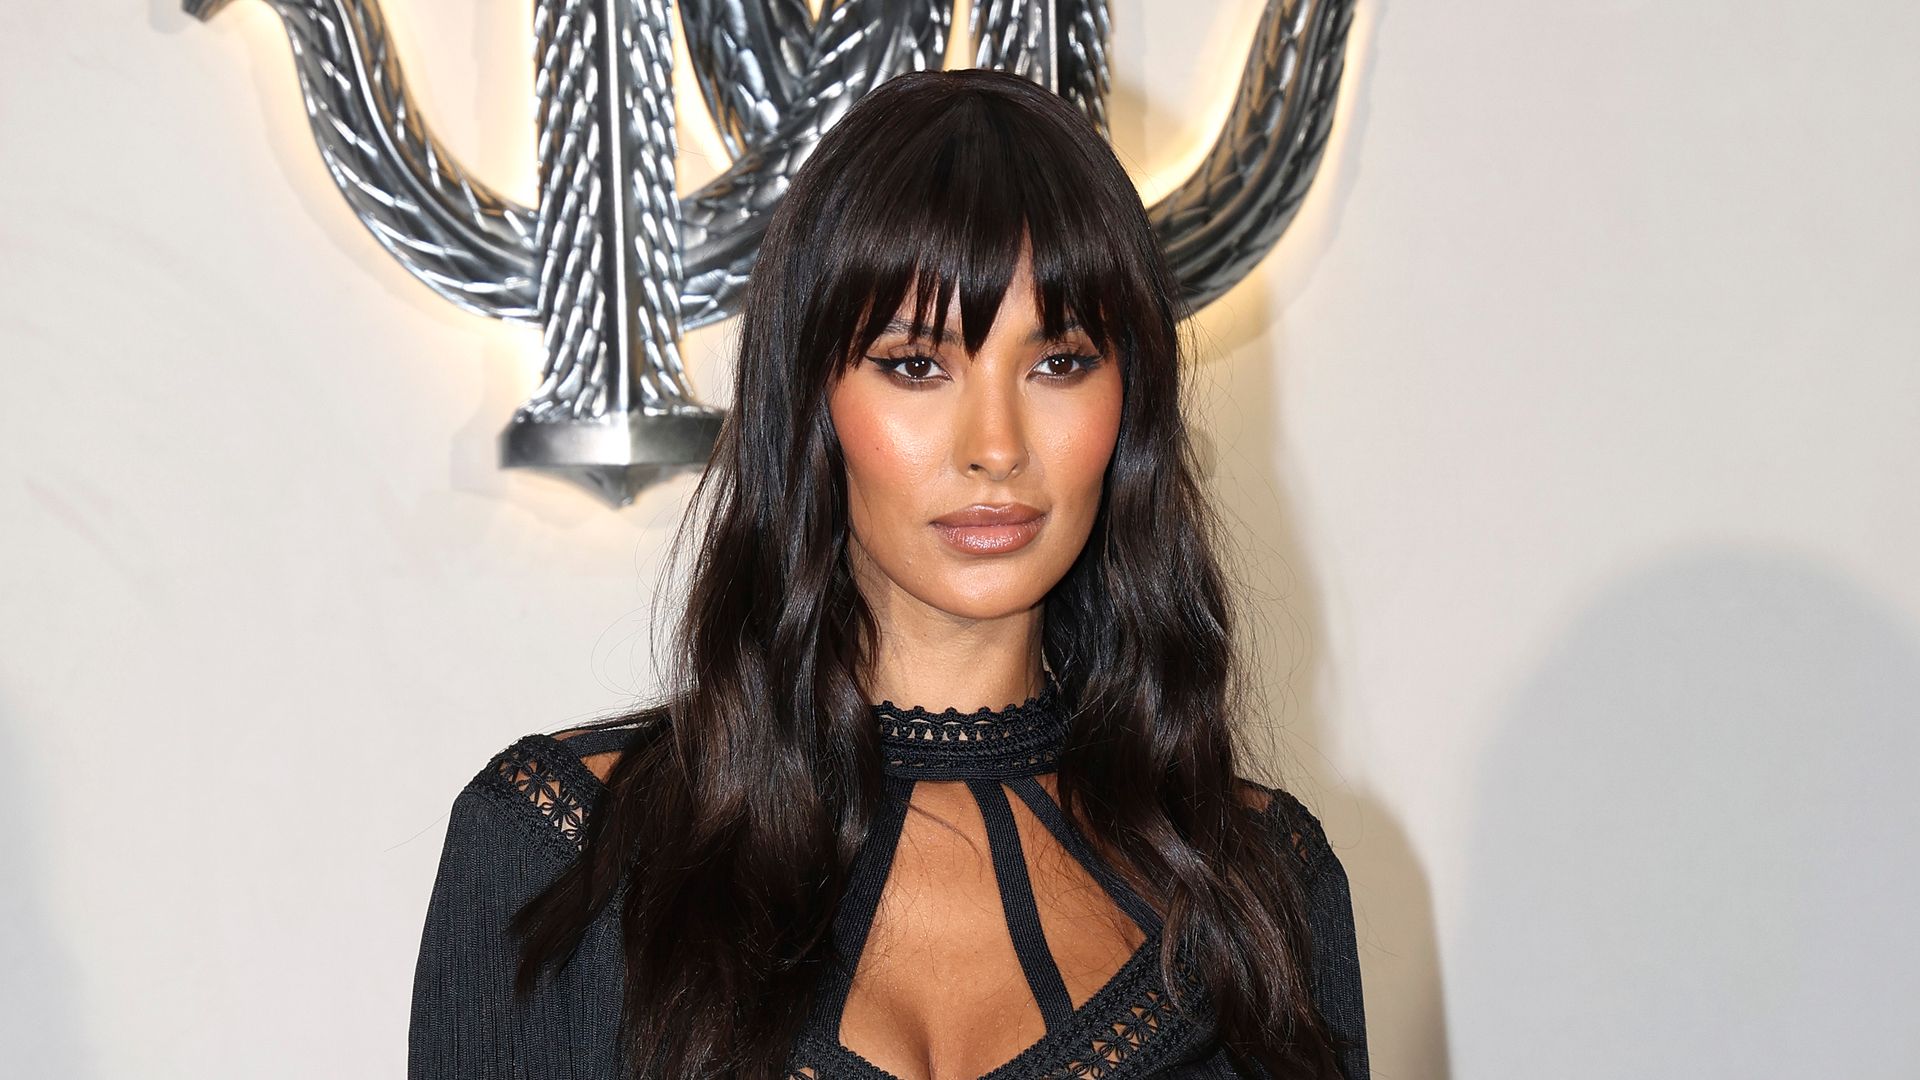 Maya Jama stuns in corset and chic micro fringe to promote upcoming secret project